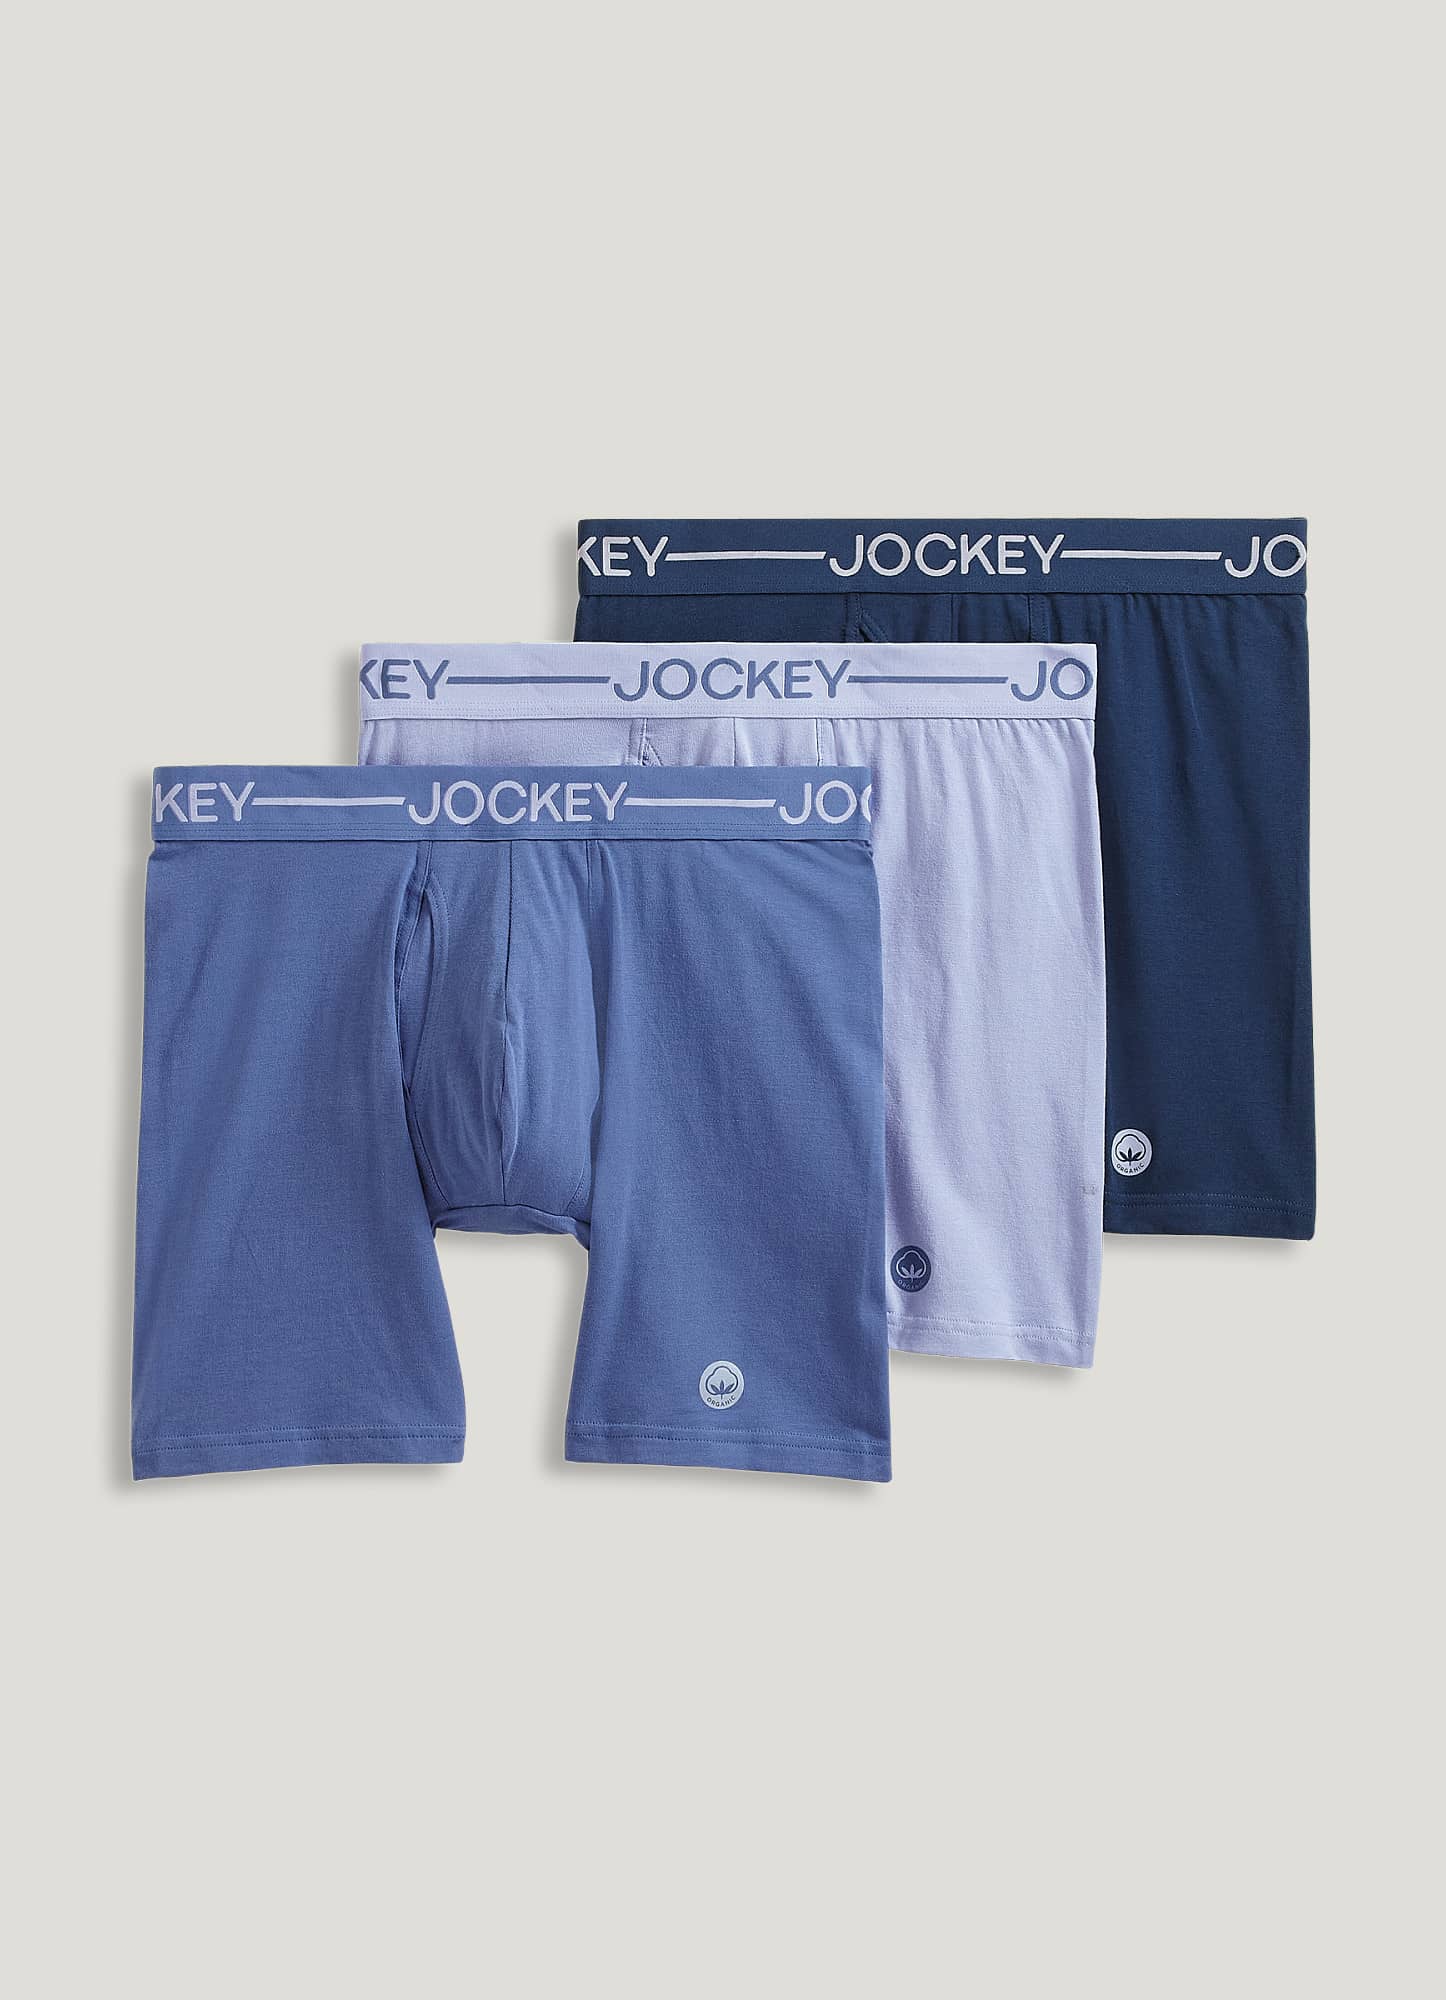 Jockey Life Men's Color Remix Cotton Stretch Boxer Brief, 2-Pack (M,  Blue/Red Sport) at  Men's Clothing store